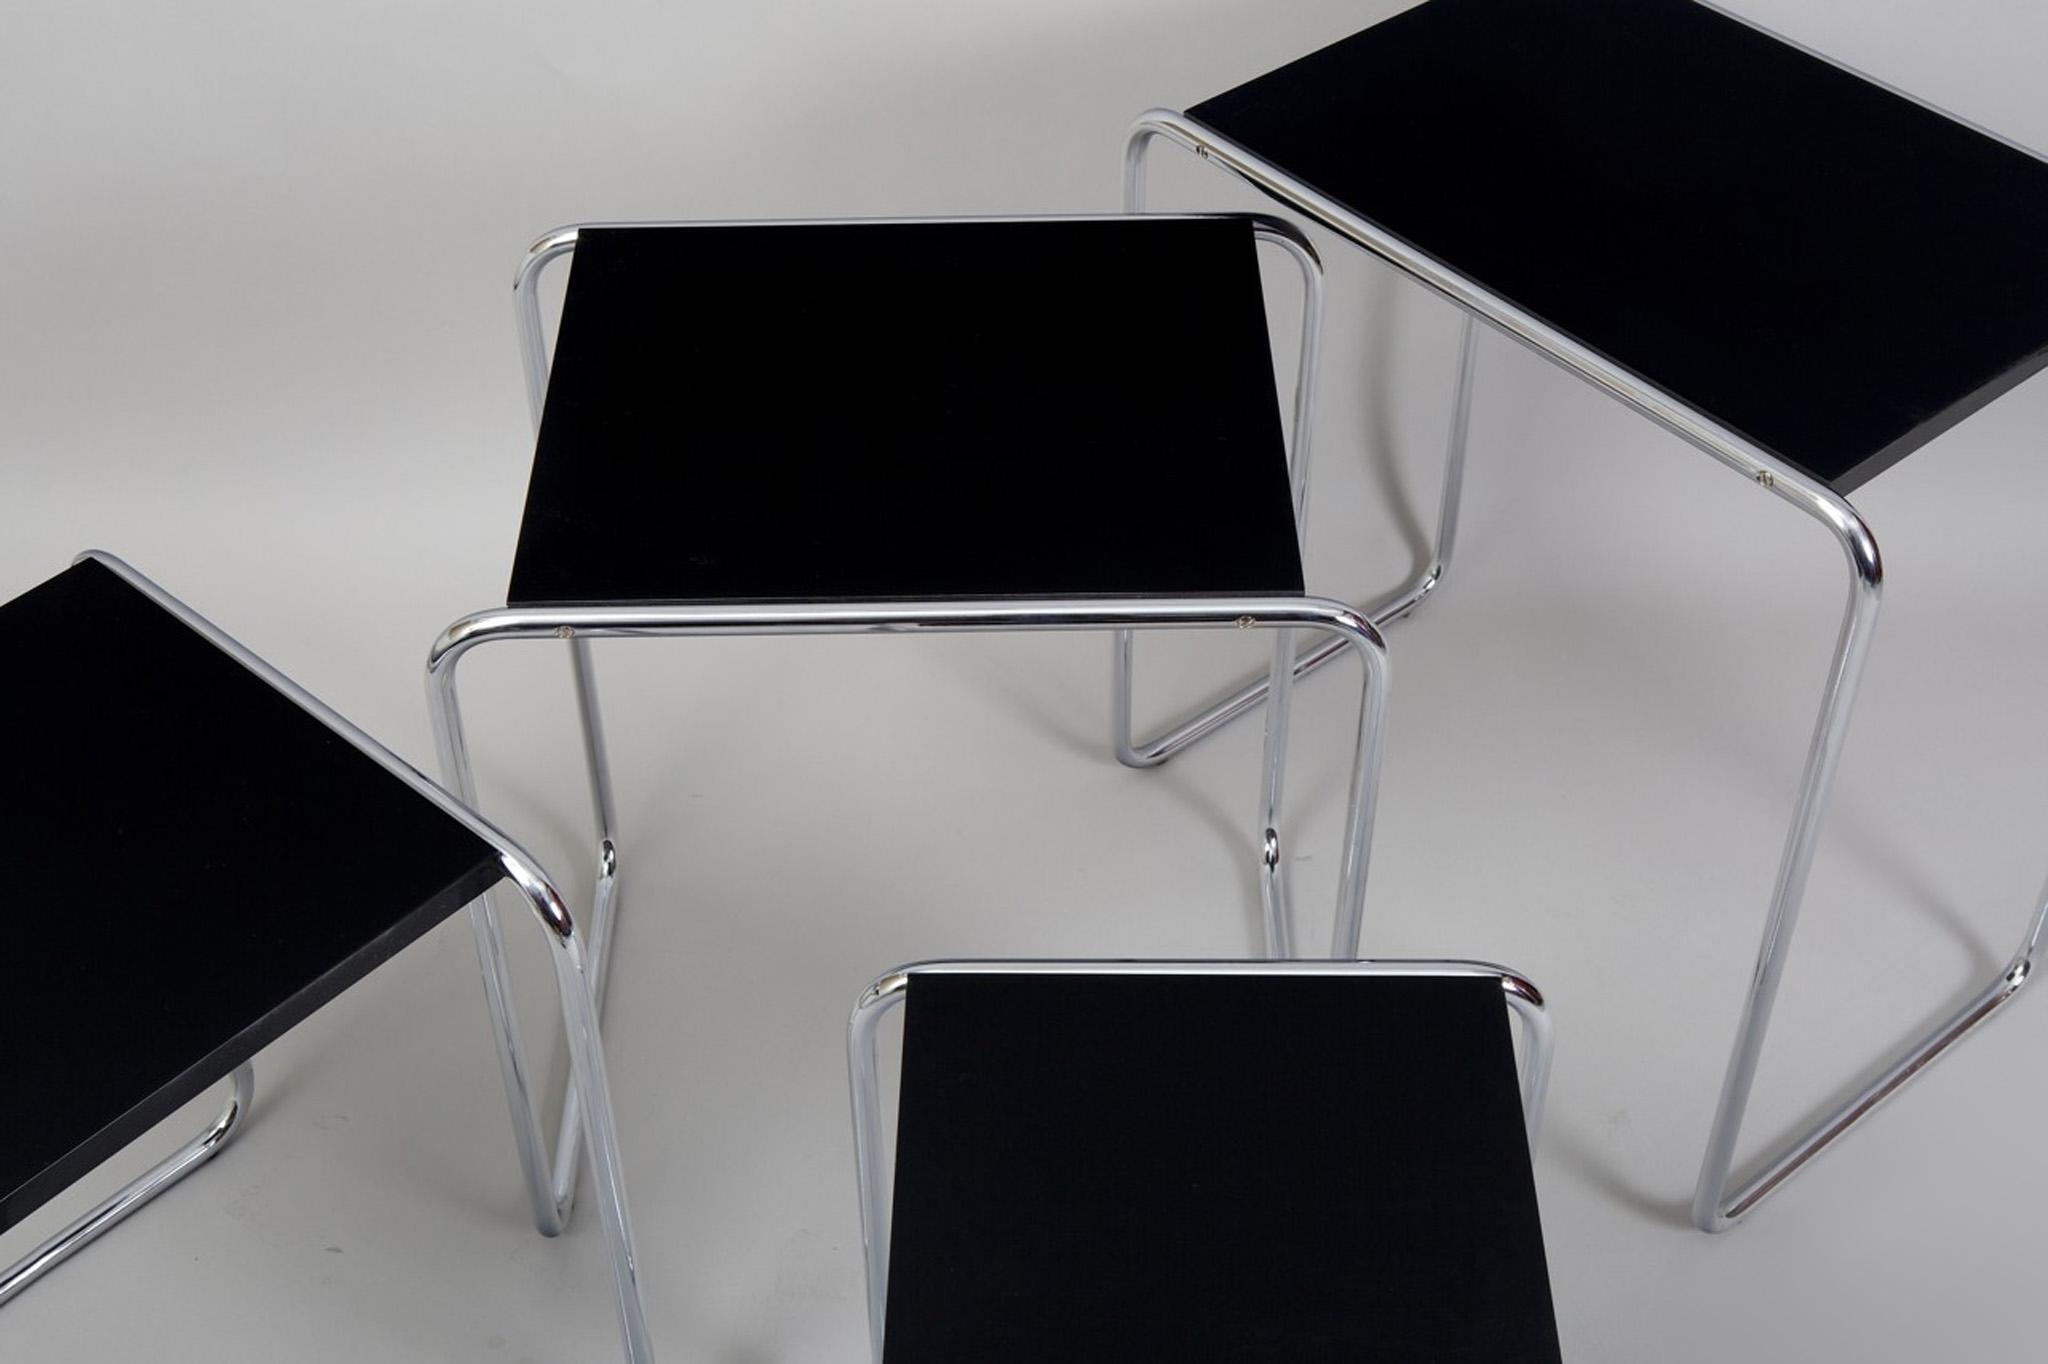 Beautiful black nest tables made in the 1950s, they are made out of lacquered wood and chrome plated steel. 
Made by Kovona

Dimensions of the biggest piece: 
Height: 59 cm (23.23 in)
Width: 56,5 cm (22.24 in)
Depth: 37 cm (14.57 in).
 